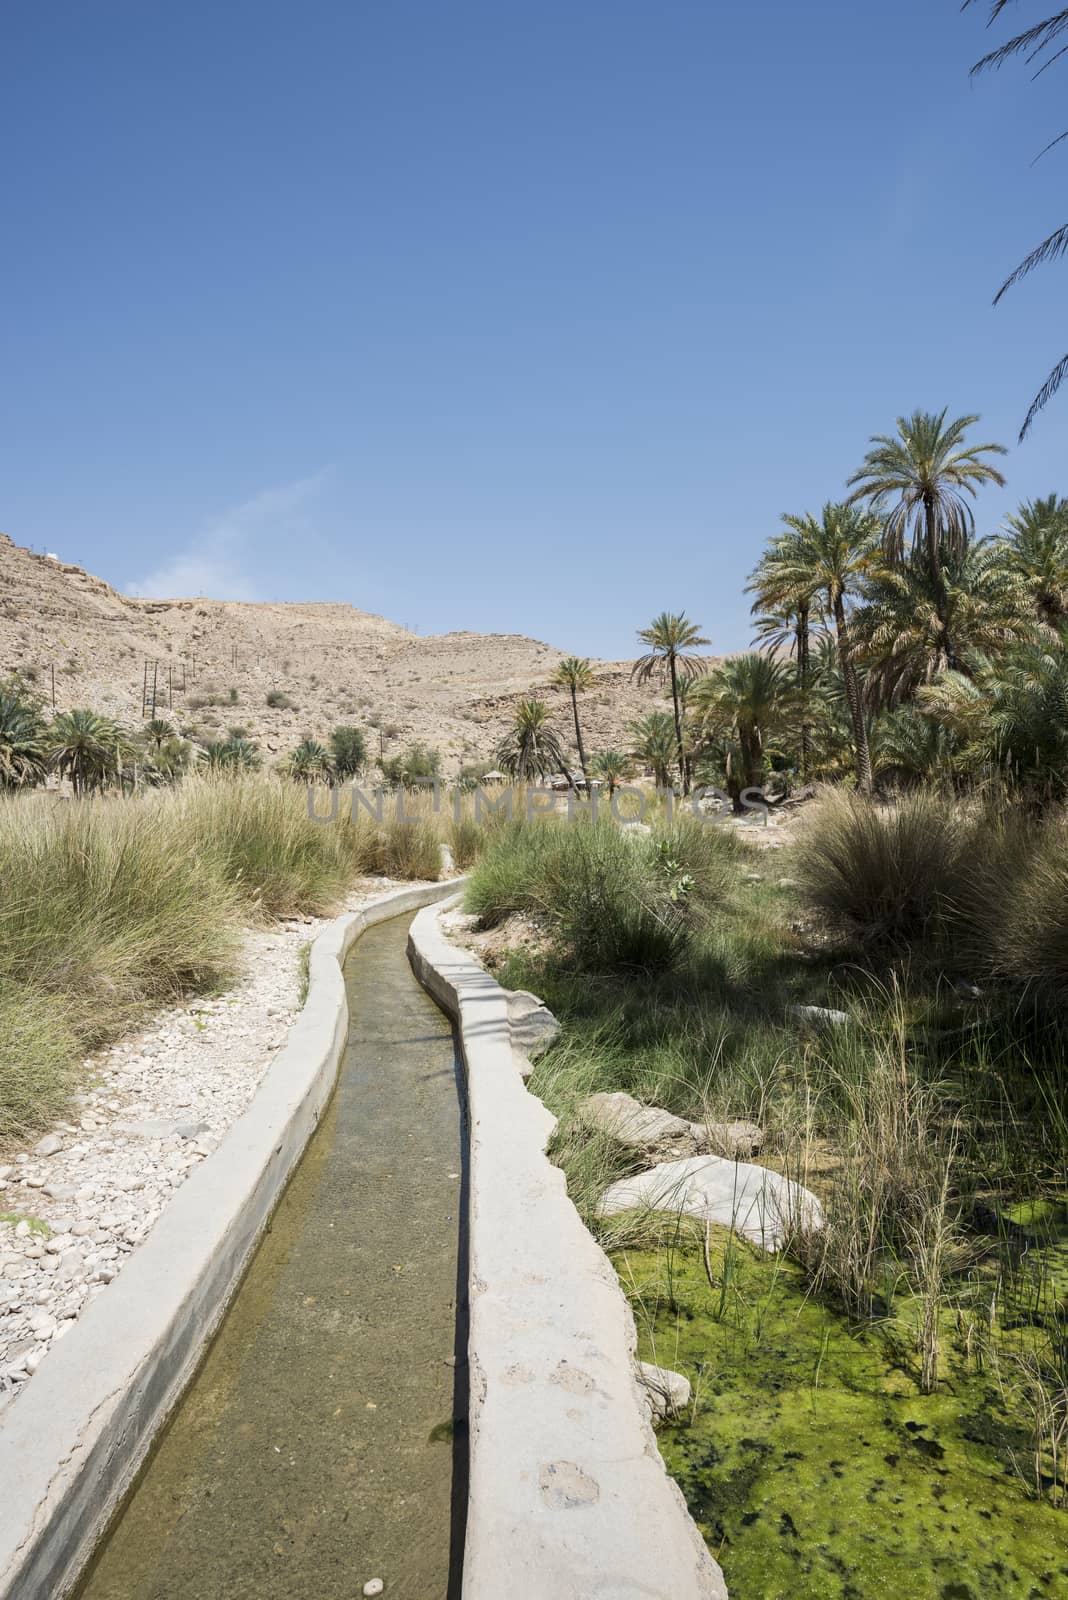 Water canal coming from a river and passing thru a garden and palm trees farm. Wadi Bani Khalid, Sultanate of Oman